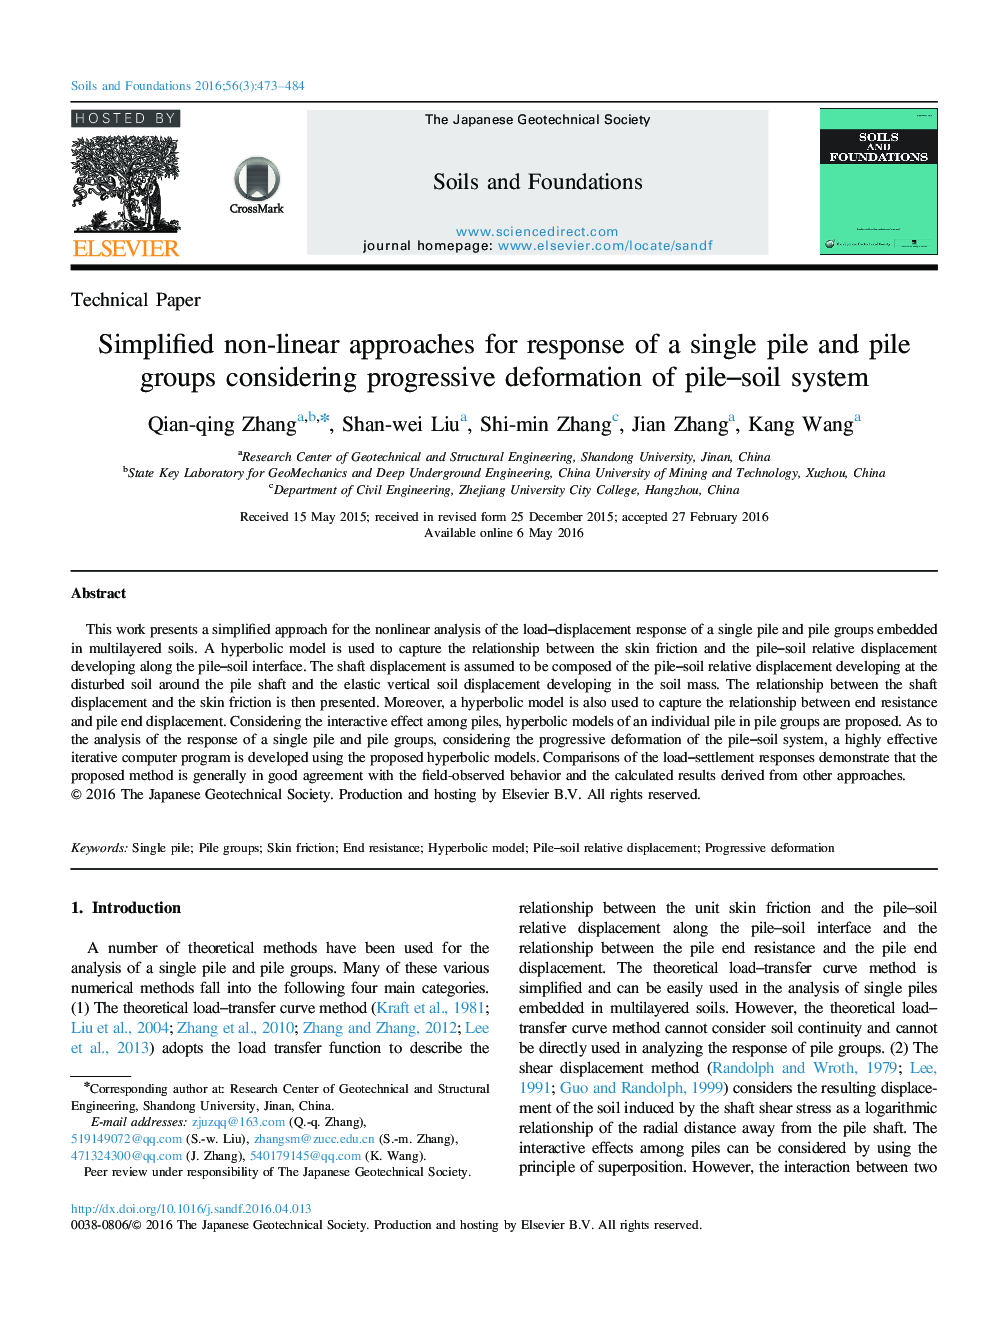 Simplified non-linear approaches for response of a single pile and pile groups considering progressive deformation of pile-soil system